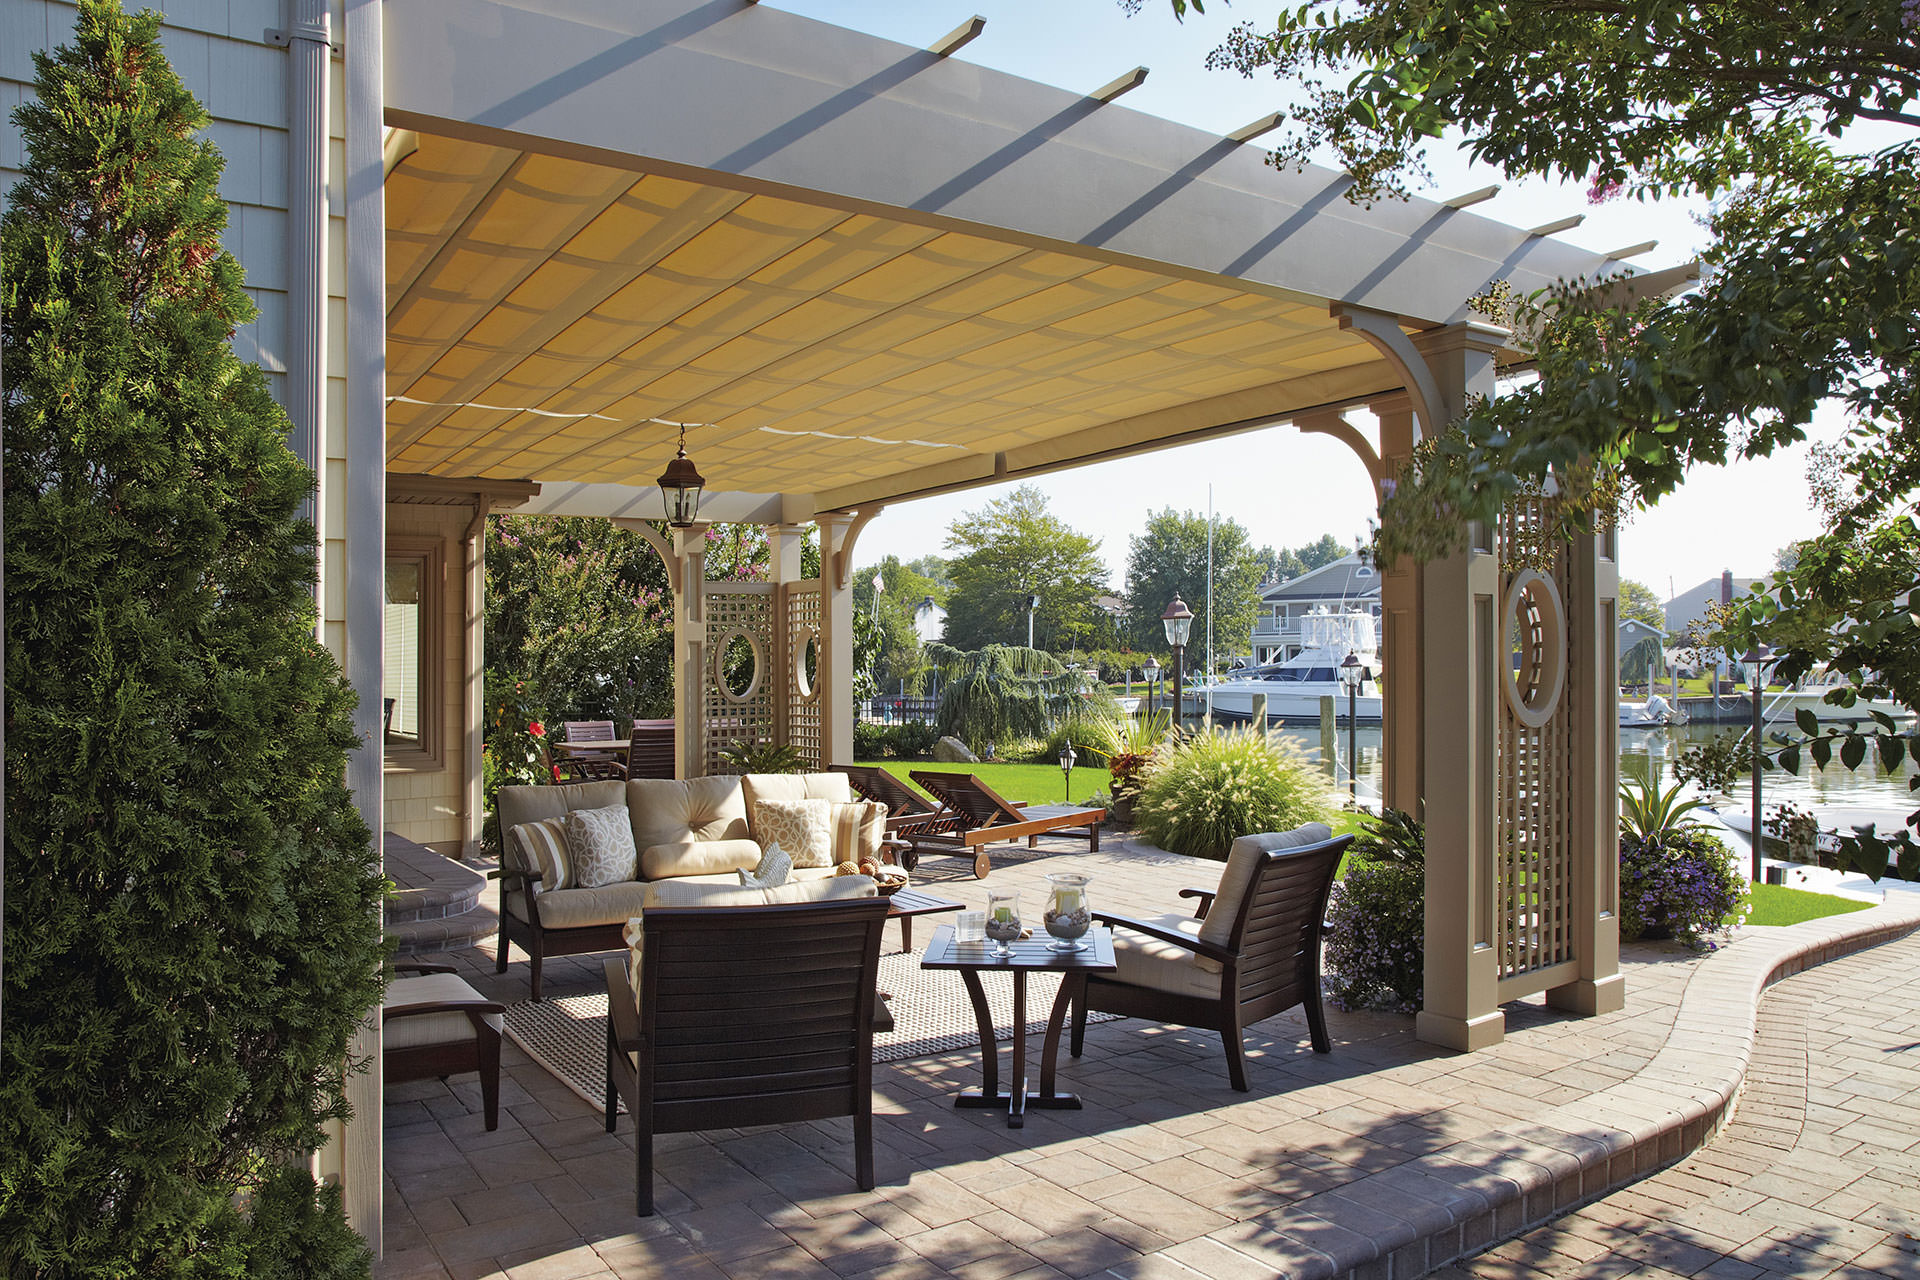 two retractable canopies on a ornate pergola